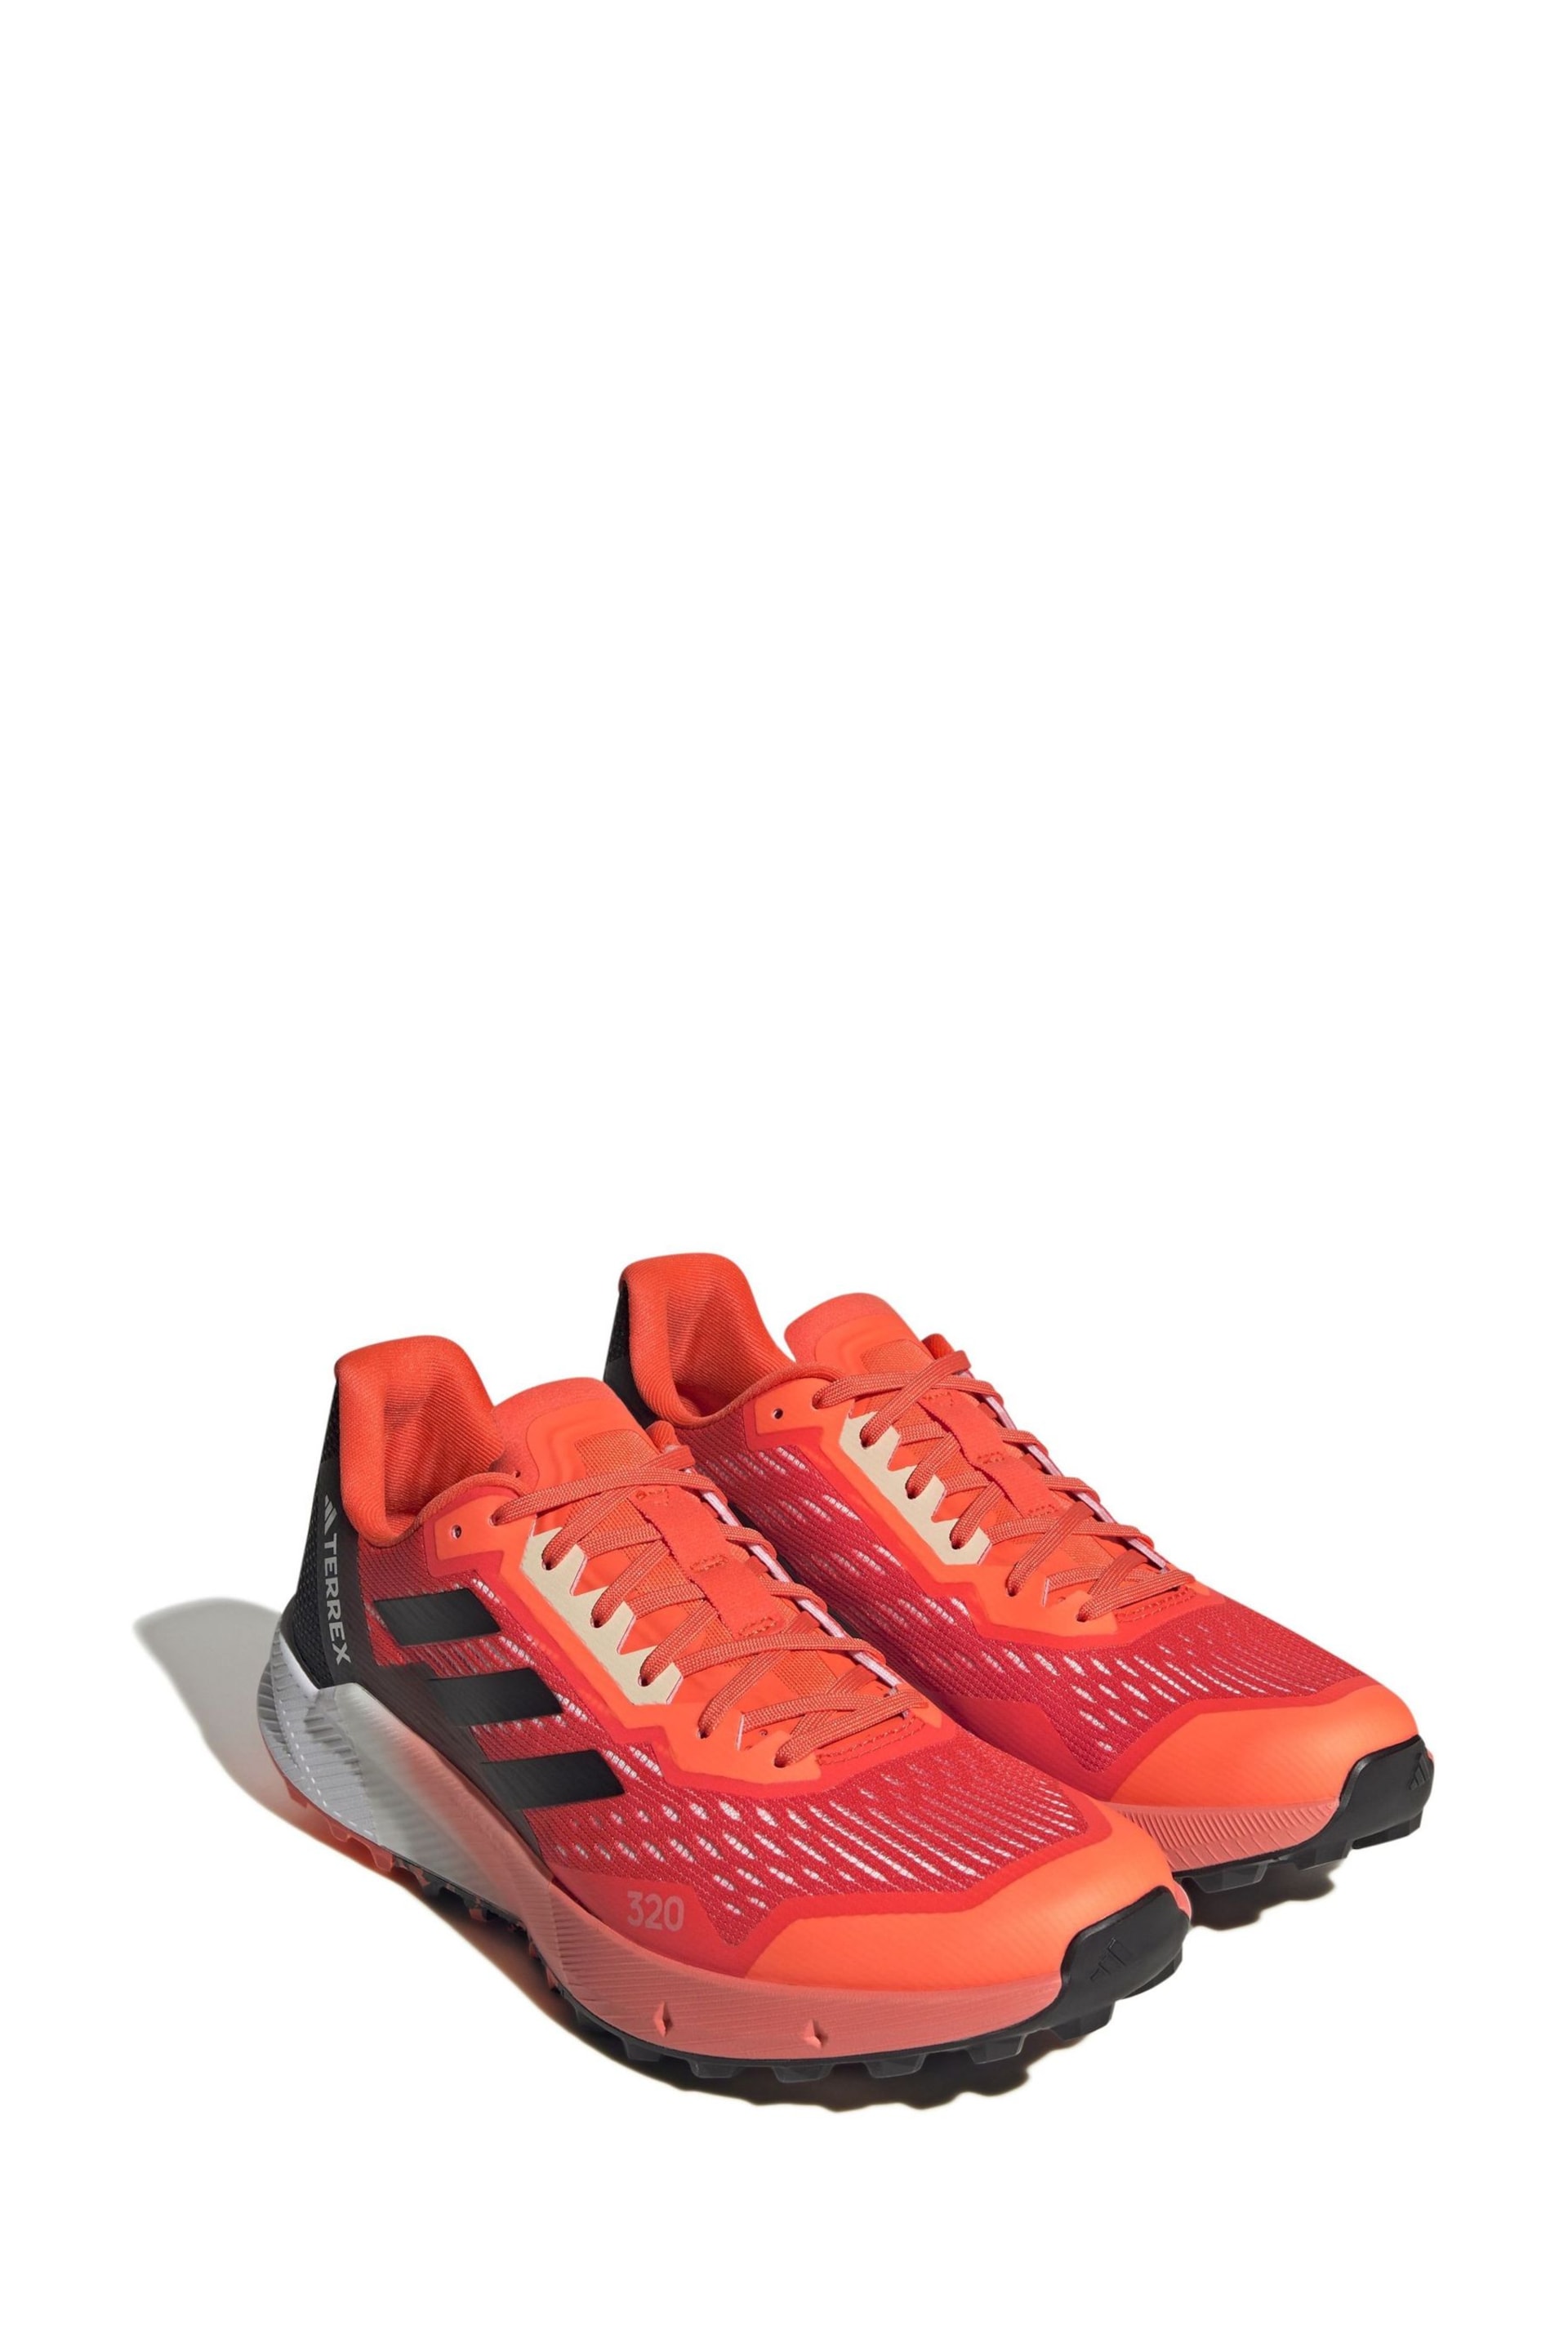 adidas Terrex Agravic Flow 2.0 Trail Running Trainers - Image 4 of 9